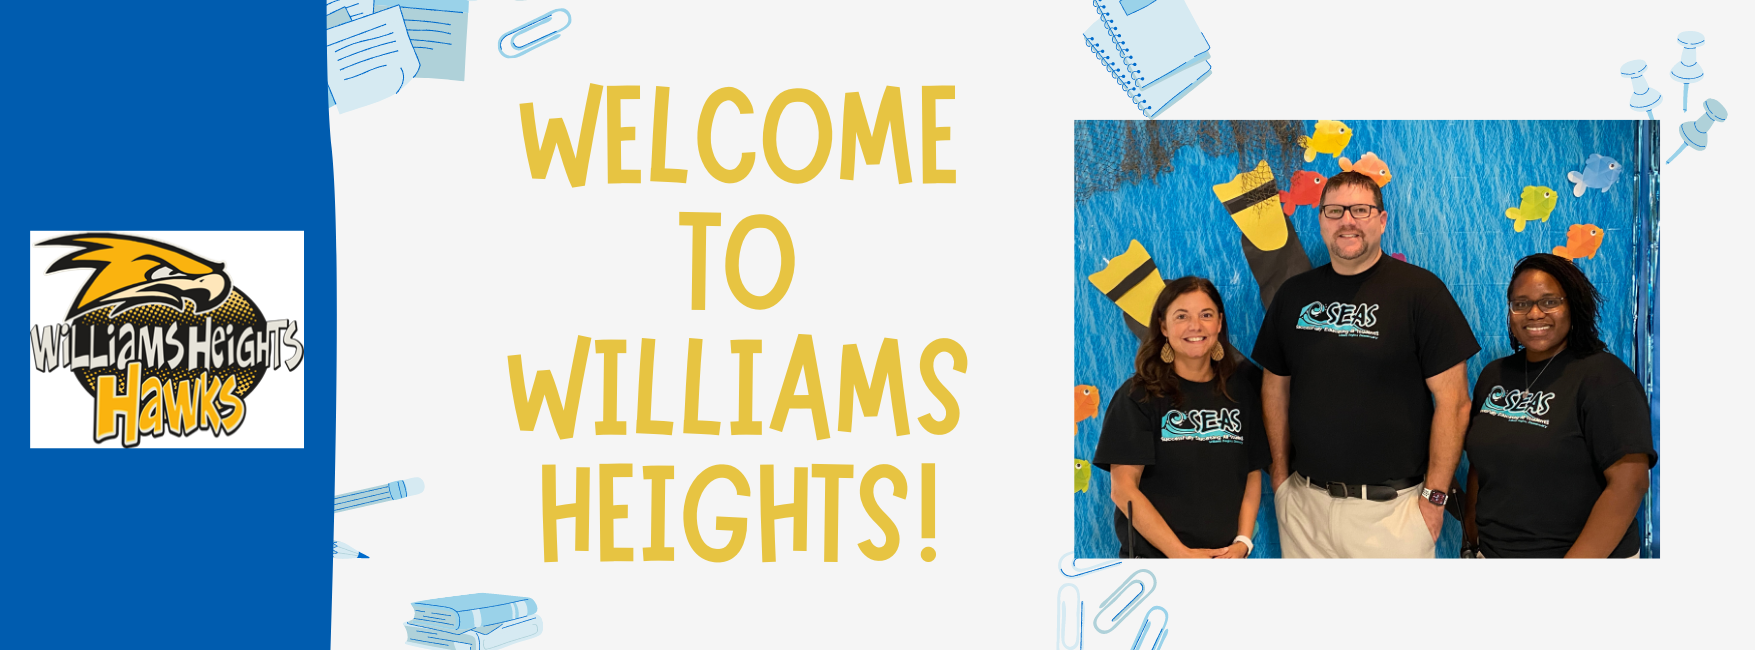 Welcome to Williams Heights!